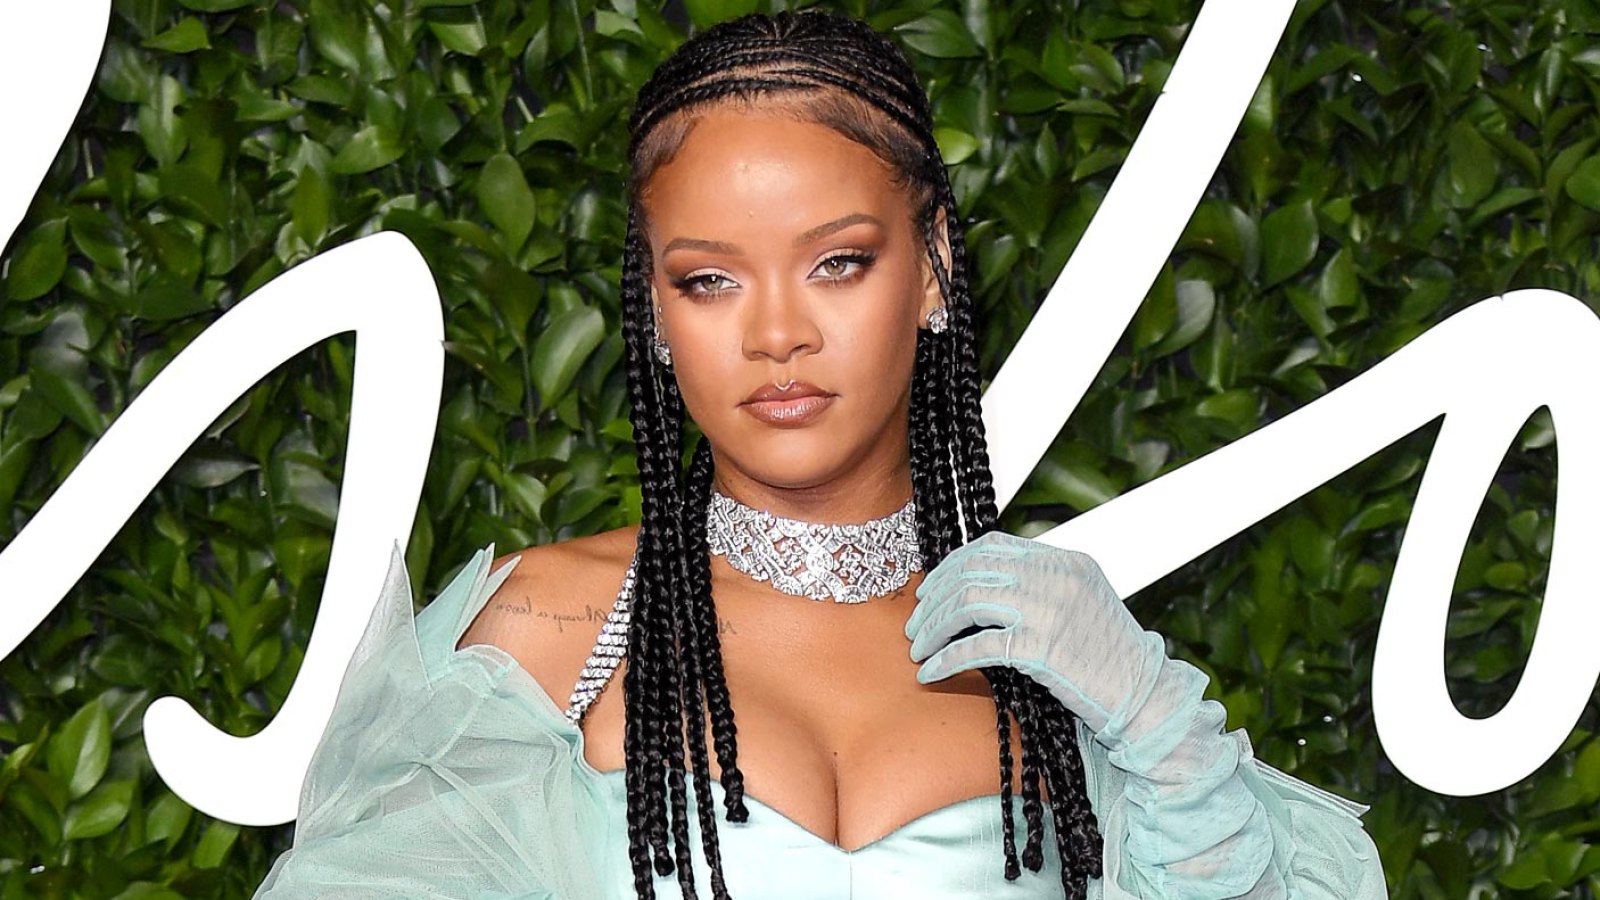 17 Items Rihanna Absolutely Must Include In Her New Clothing Line